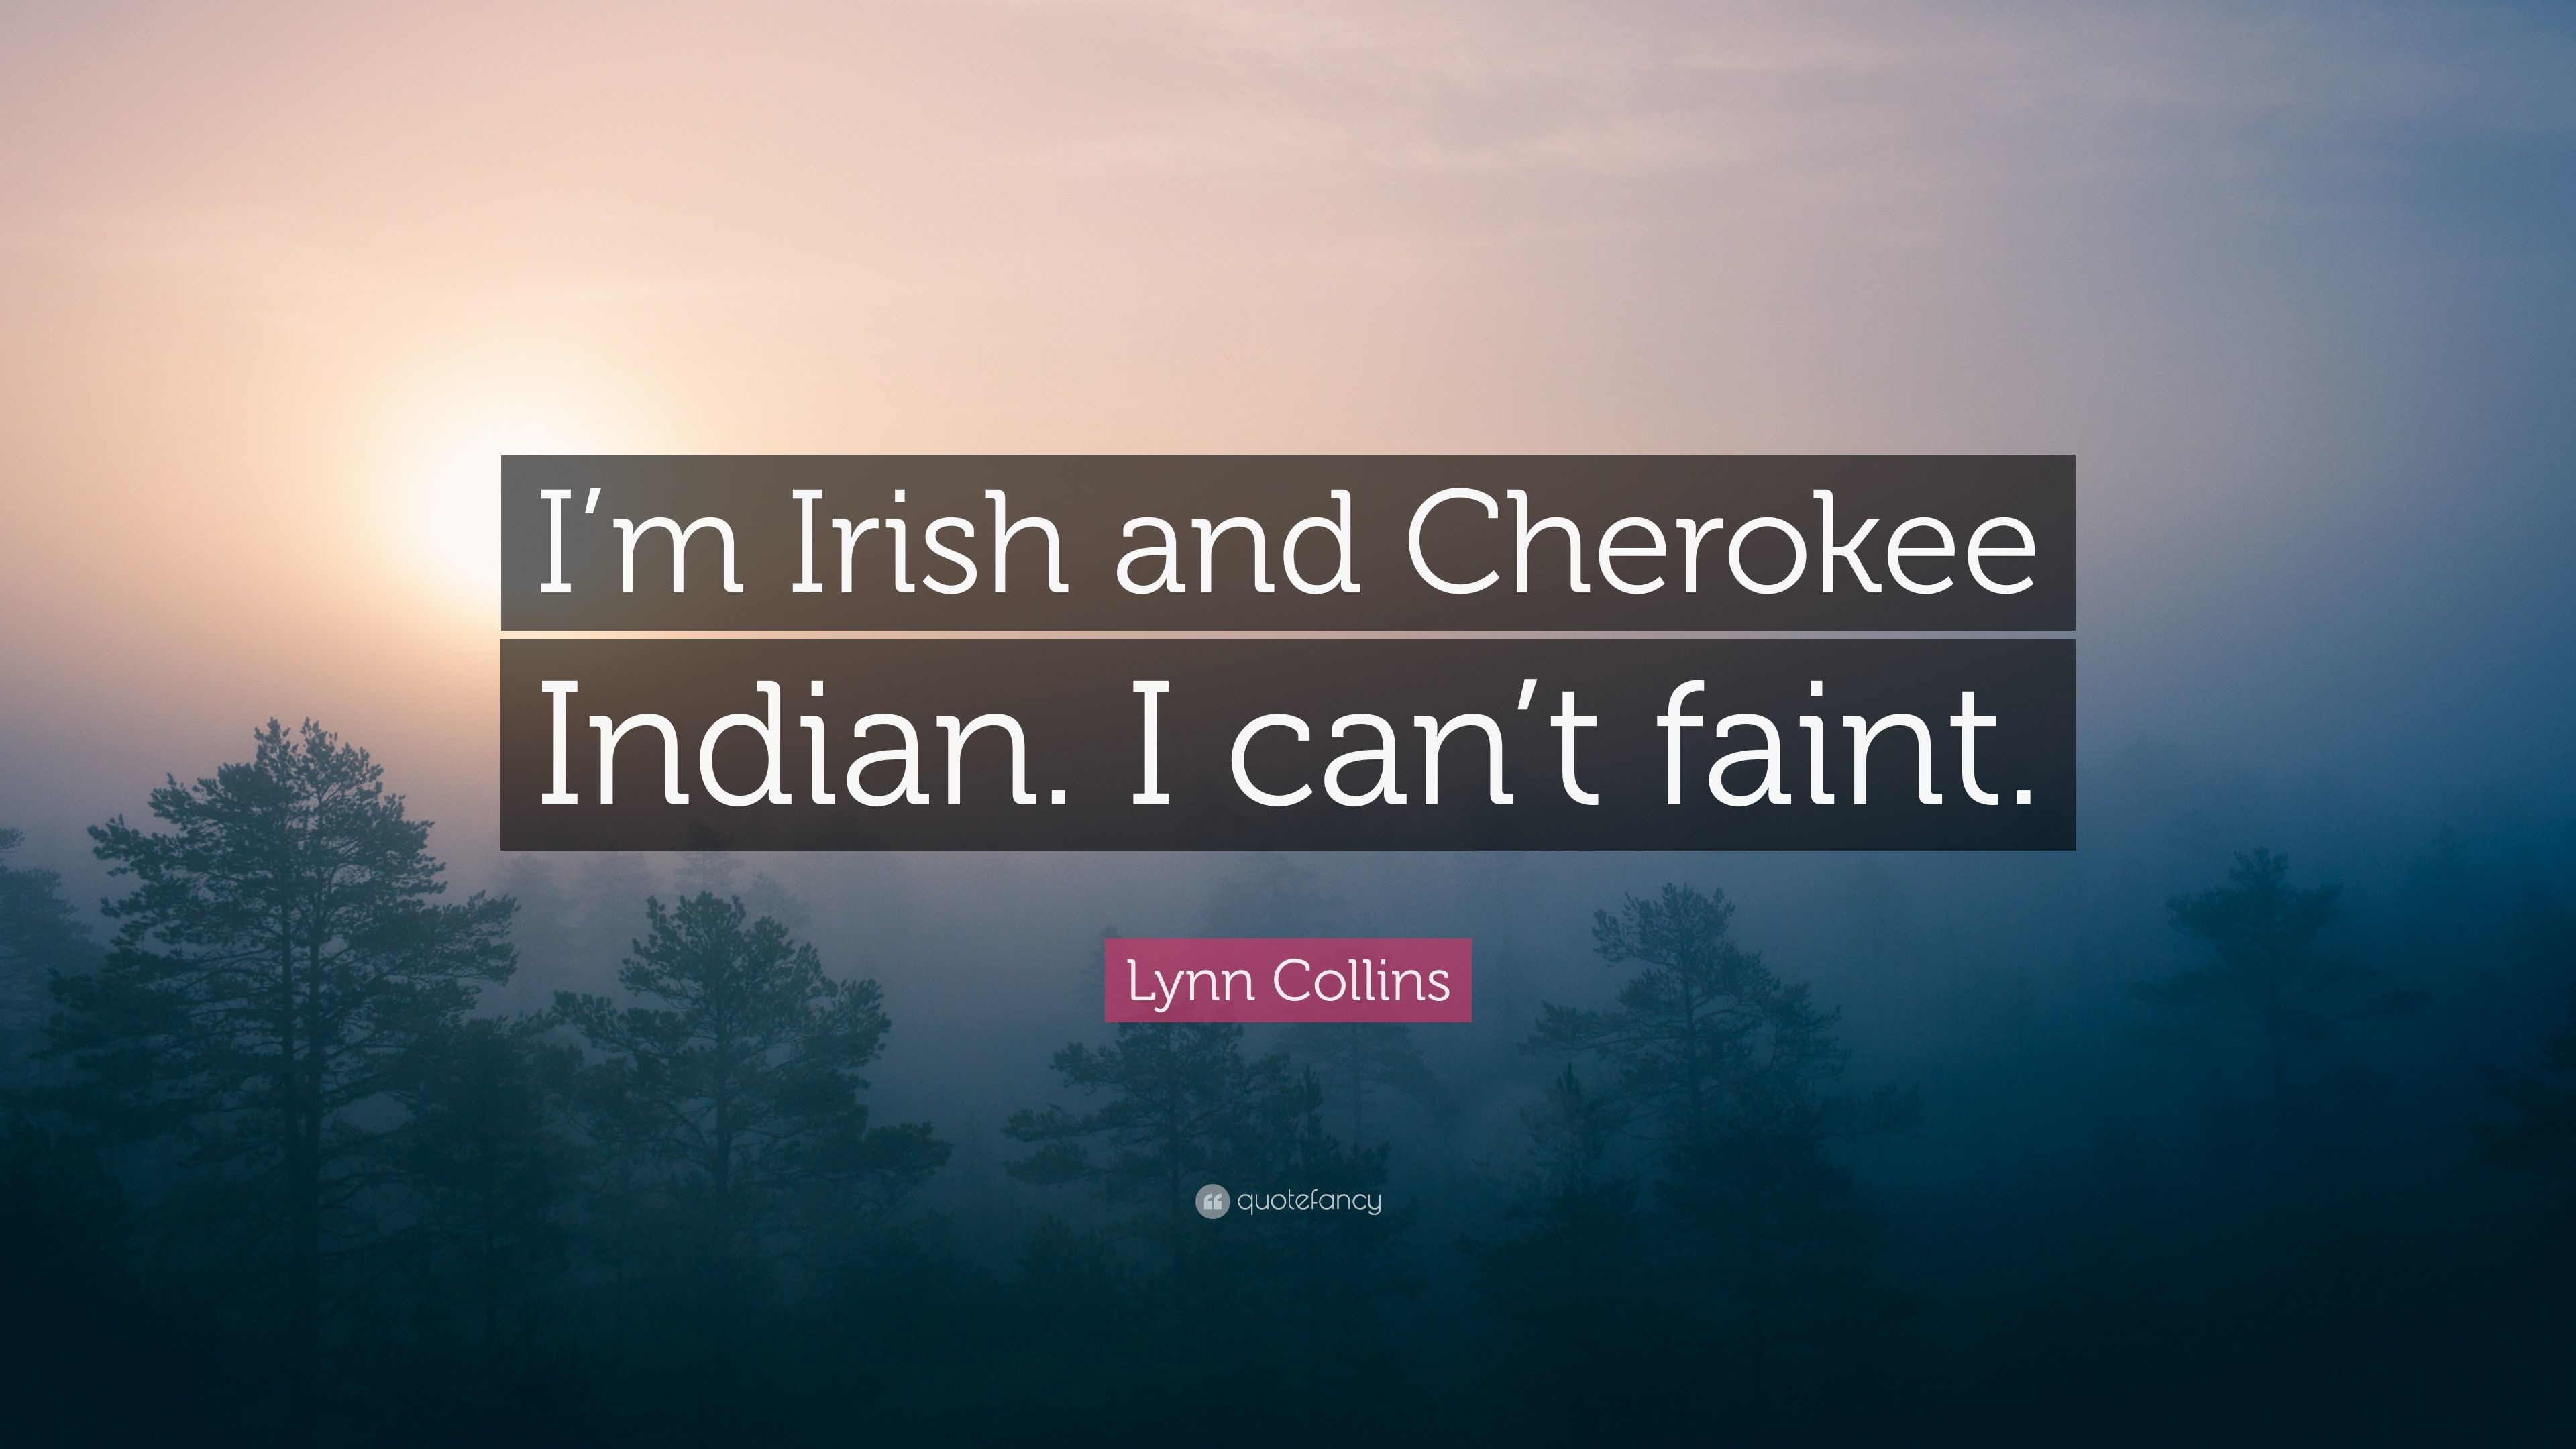 Lynn Collins Quote Im Irish and Cherokee Indian. I can